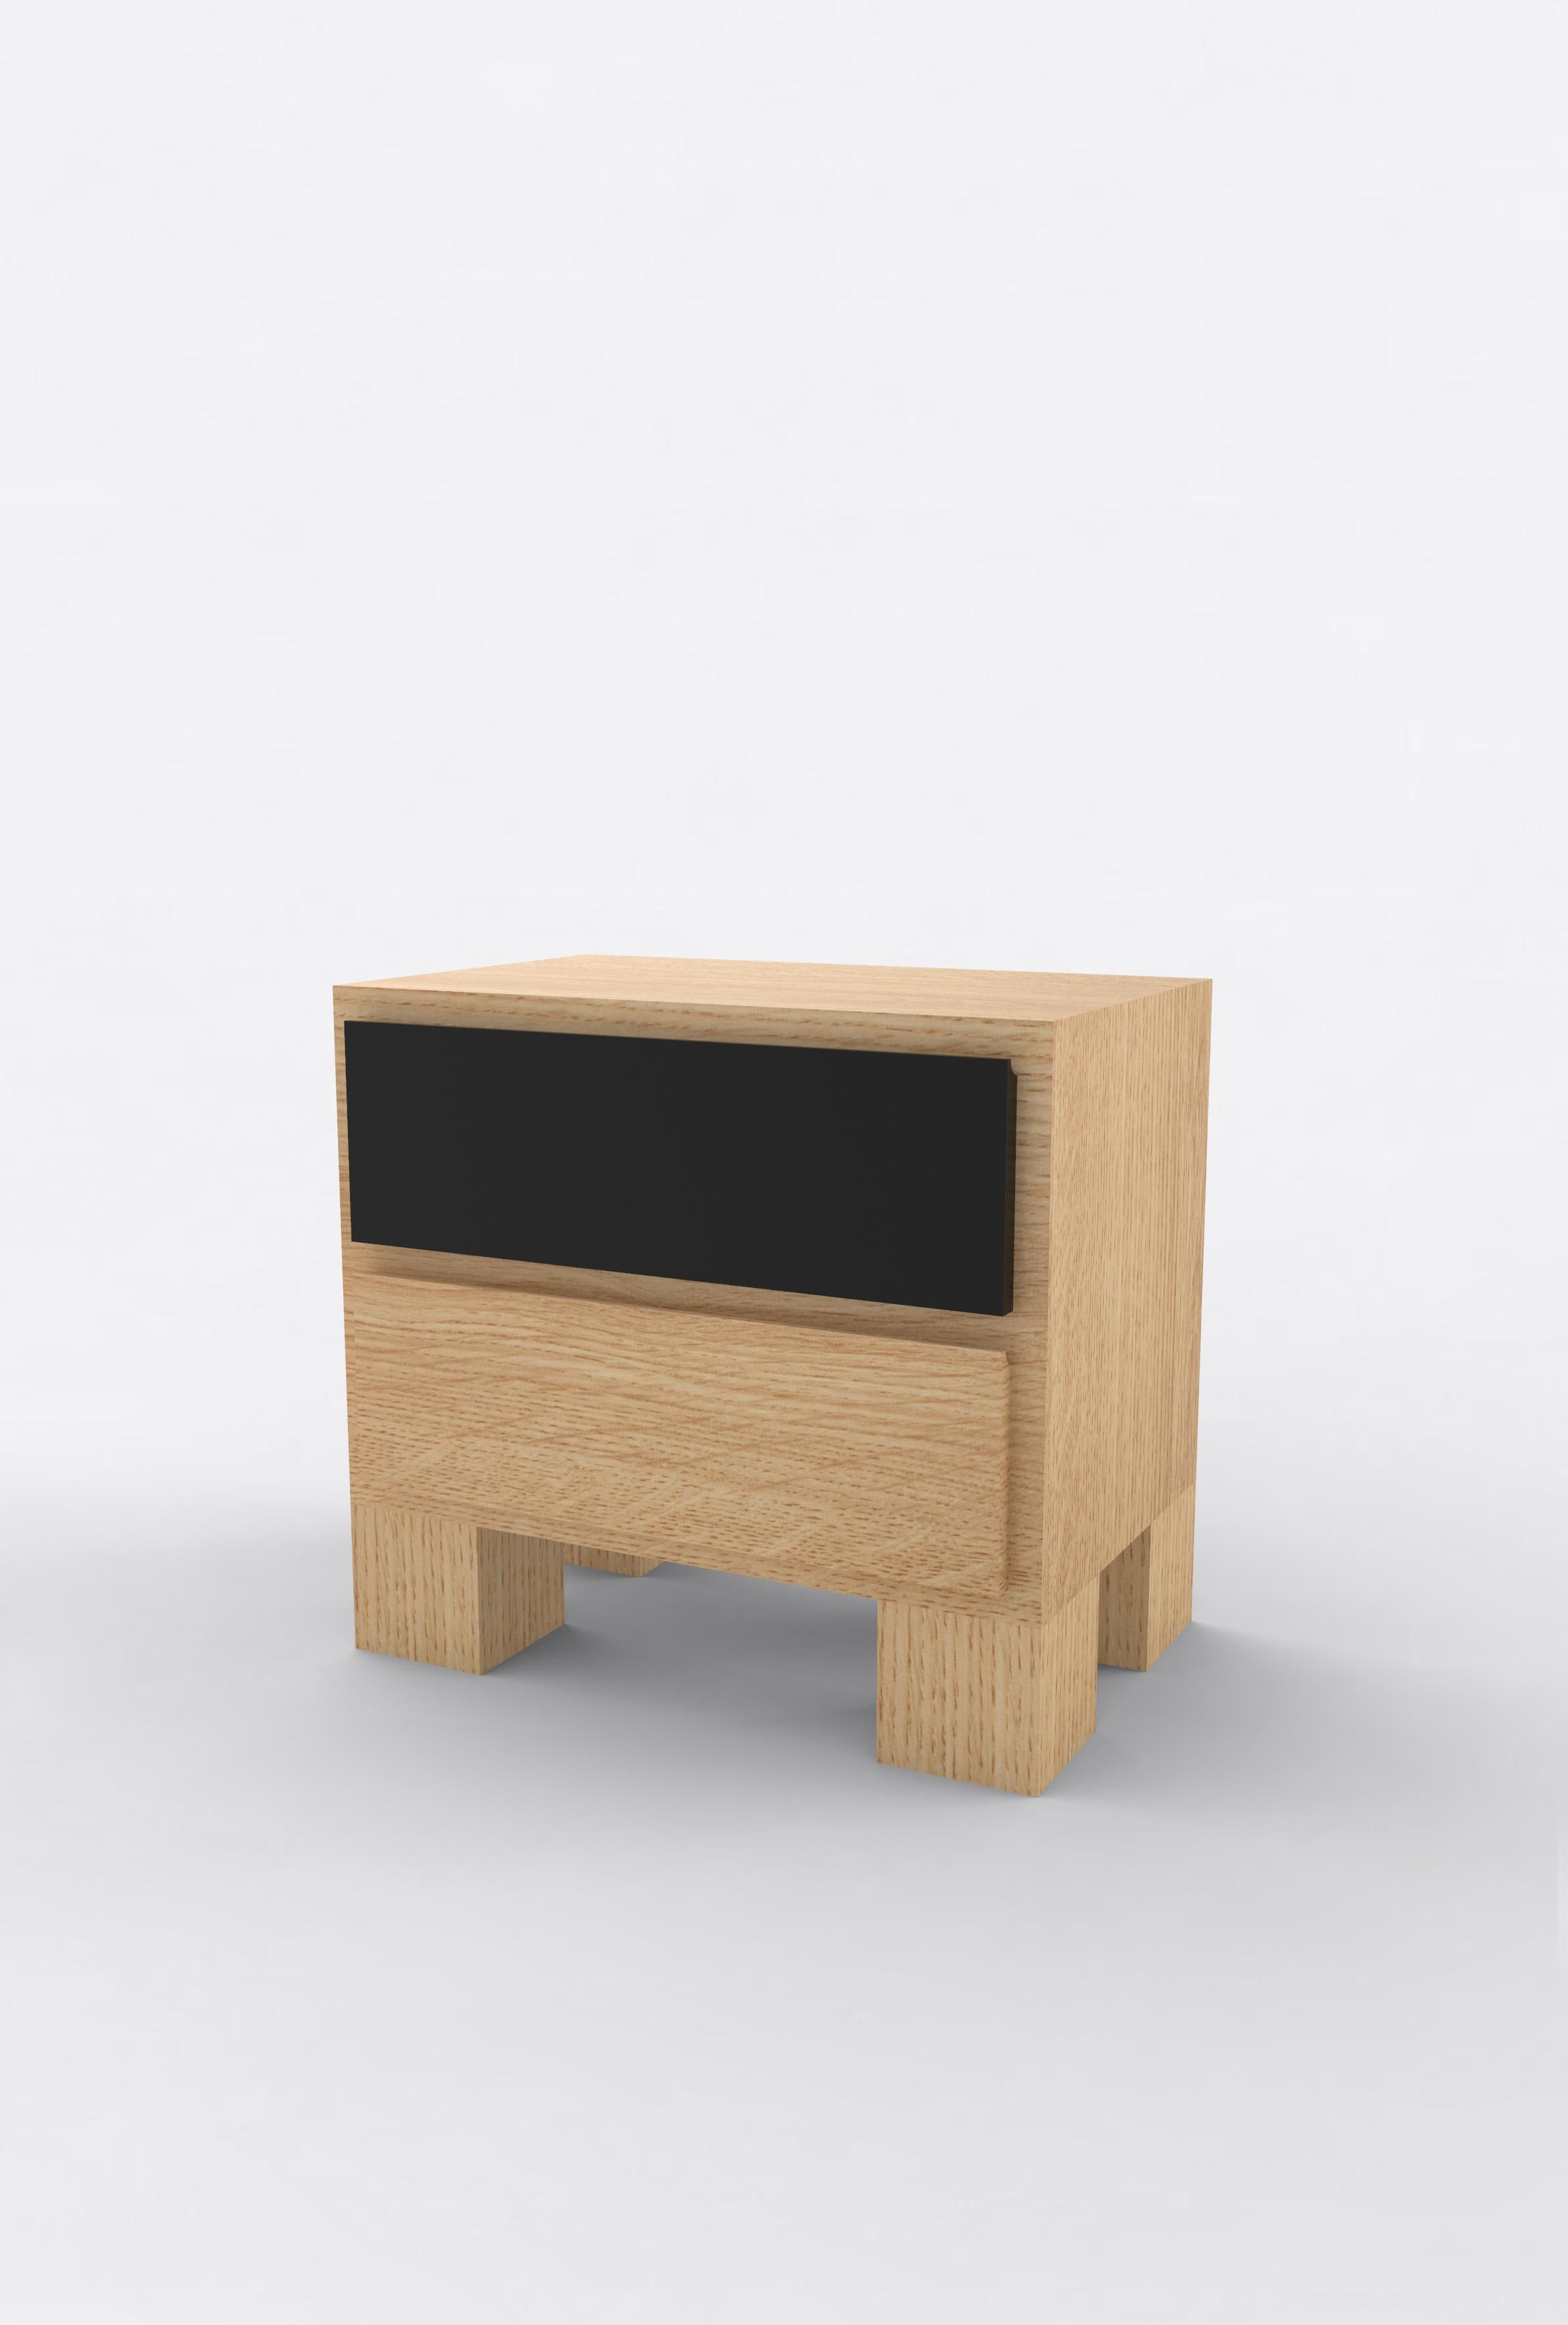 Orphan Work 101 Bedside
Shown in oak and black.
Available in natural oak with painted drawer
Measures: 24” W x 15” D x 22” H
2 drawers

Orphan work is designed to complement in the heart of Soho, New York City. Each piece is handmade in New York and